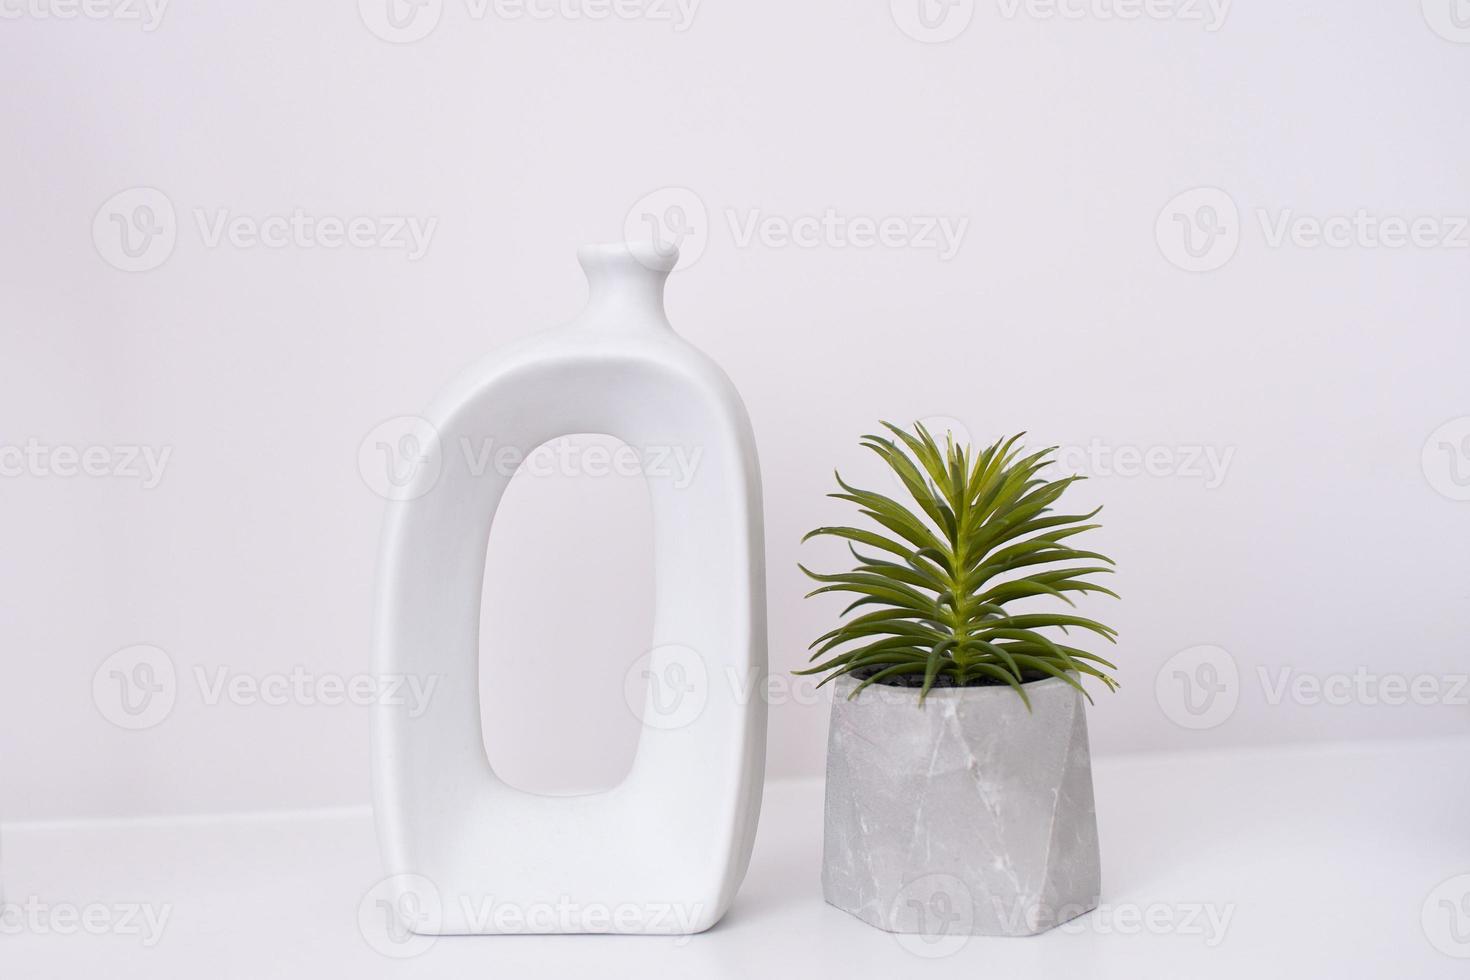 A white vase in the shape of a bottle stands on the table next to an aloe flower photo